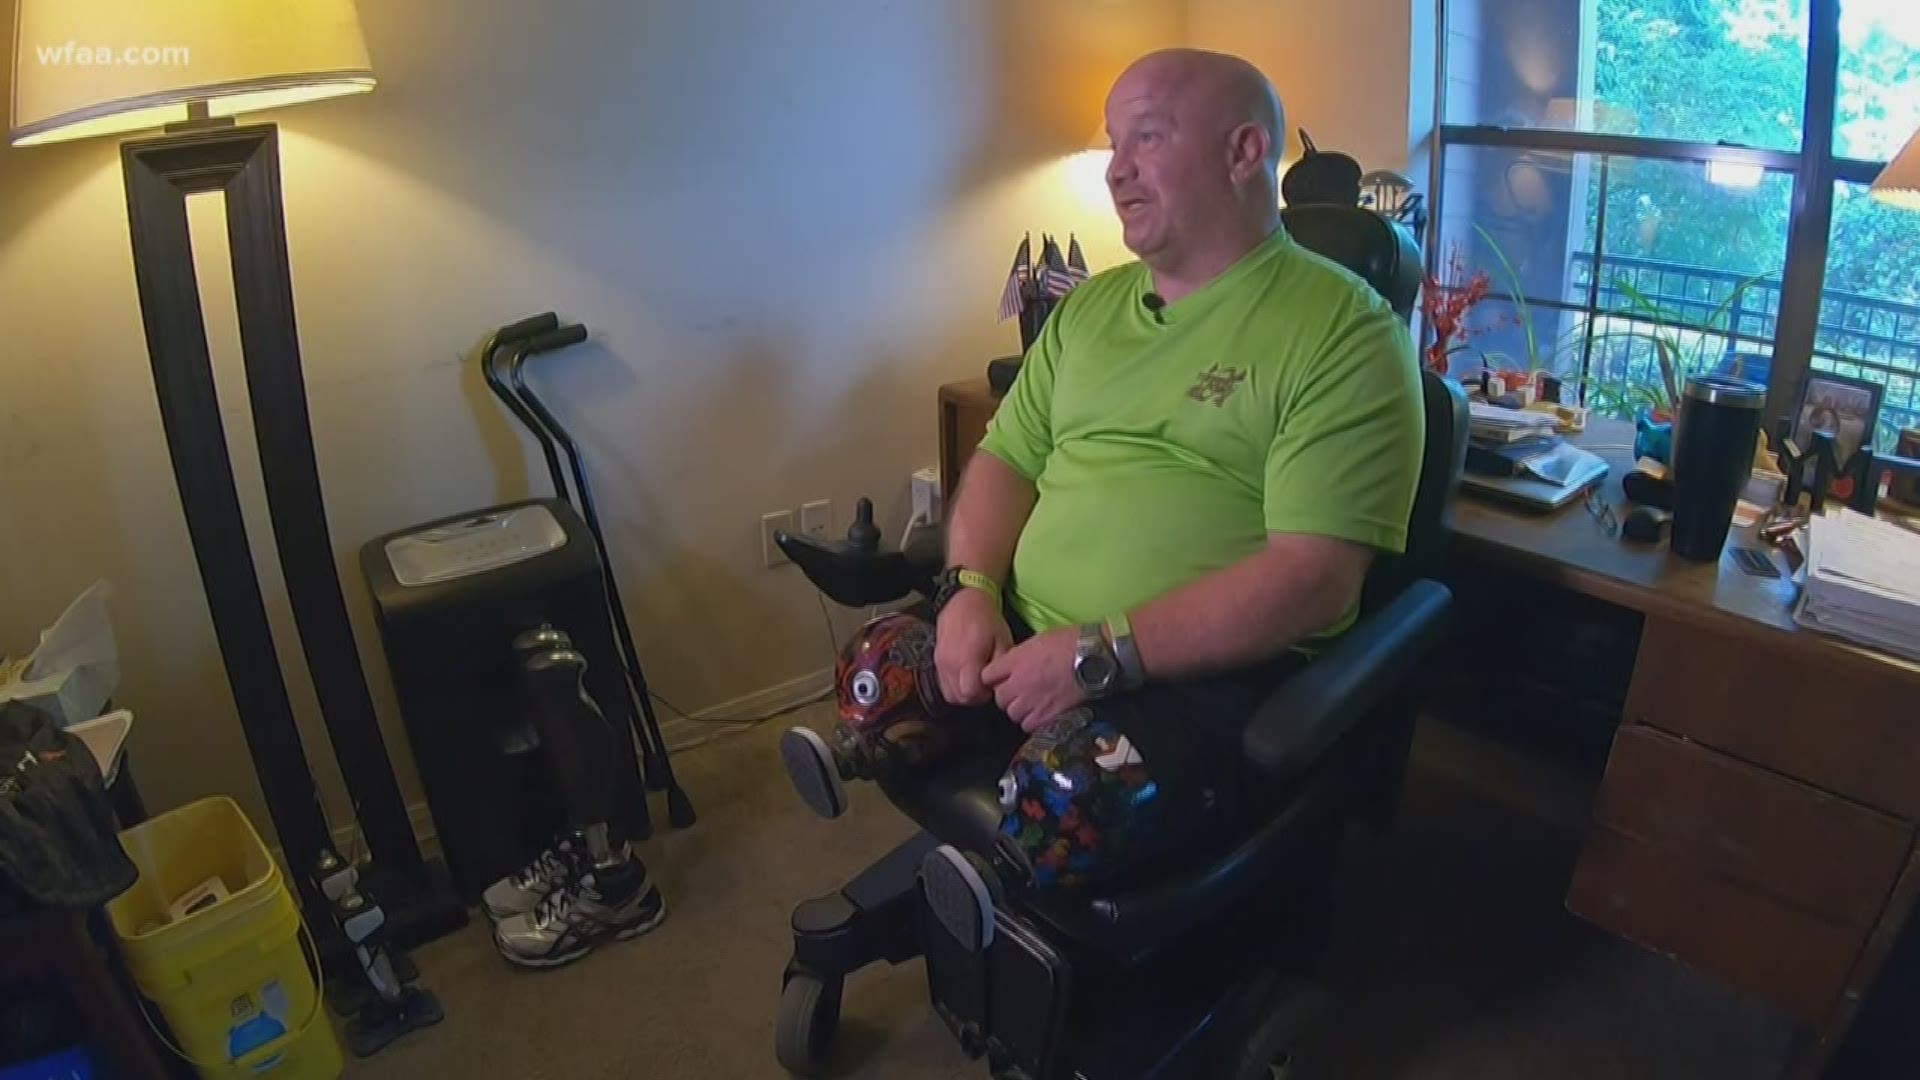 A former Fort Worth paramedic, who is also a double amputee and para-athlete, is out around $10,000 after discovering two of his racing cycles were stolen when he returned from an amputee conference.